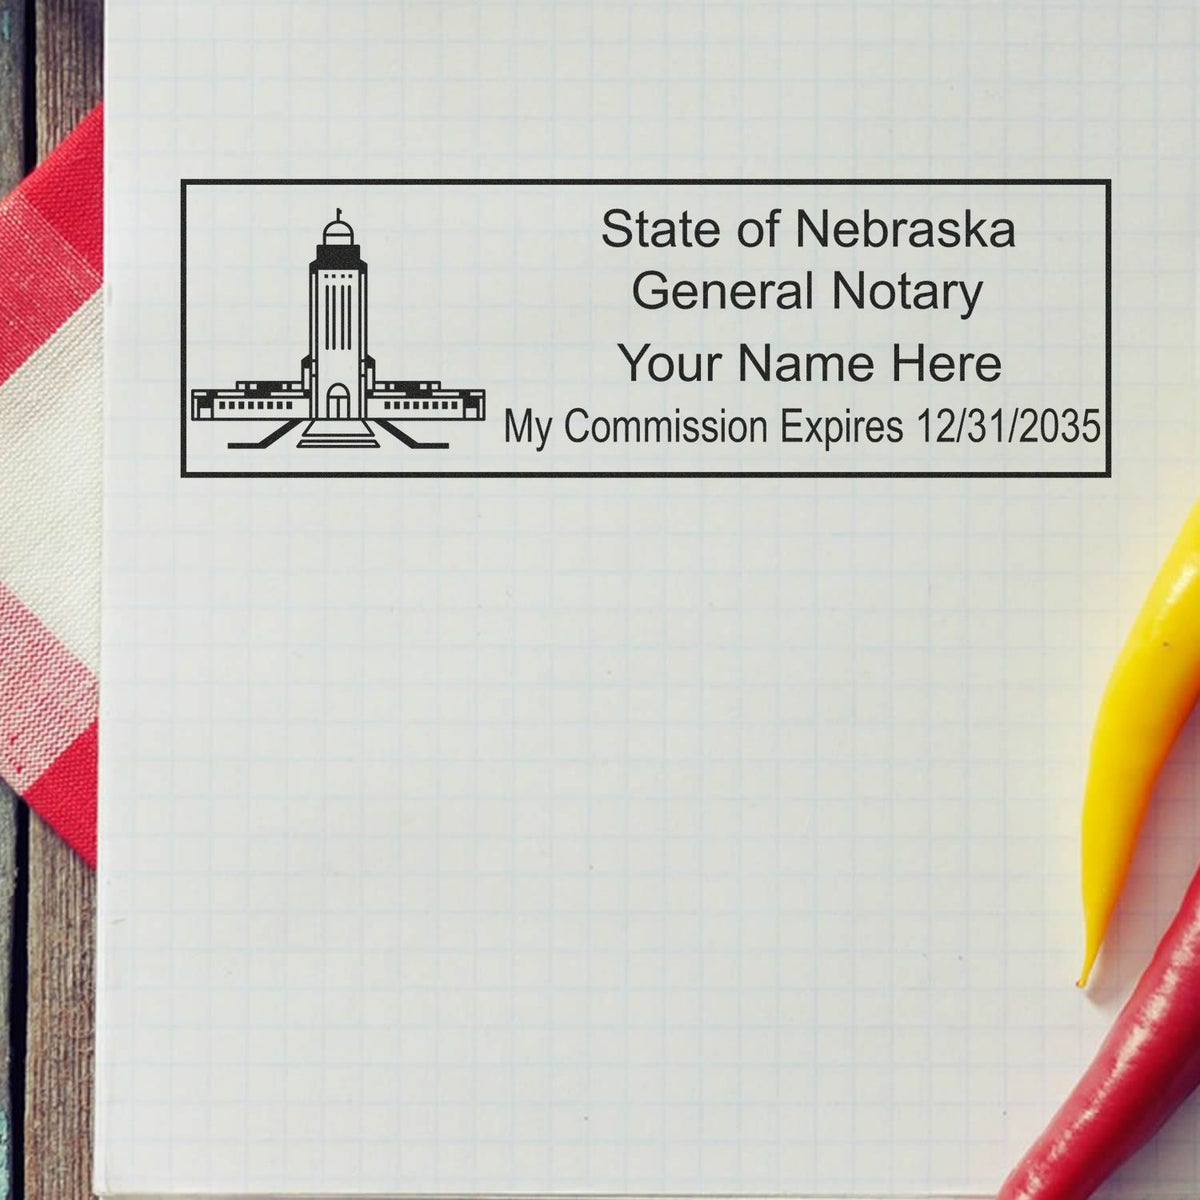 This paper is stamped with a sample imprint of the Super Slim Nebraska Notary Public Stamp, signifying its quality and reliability.